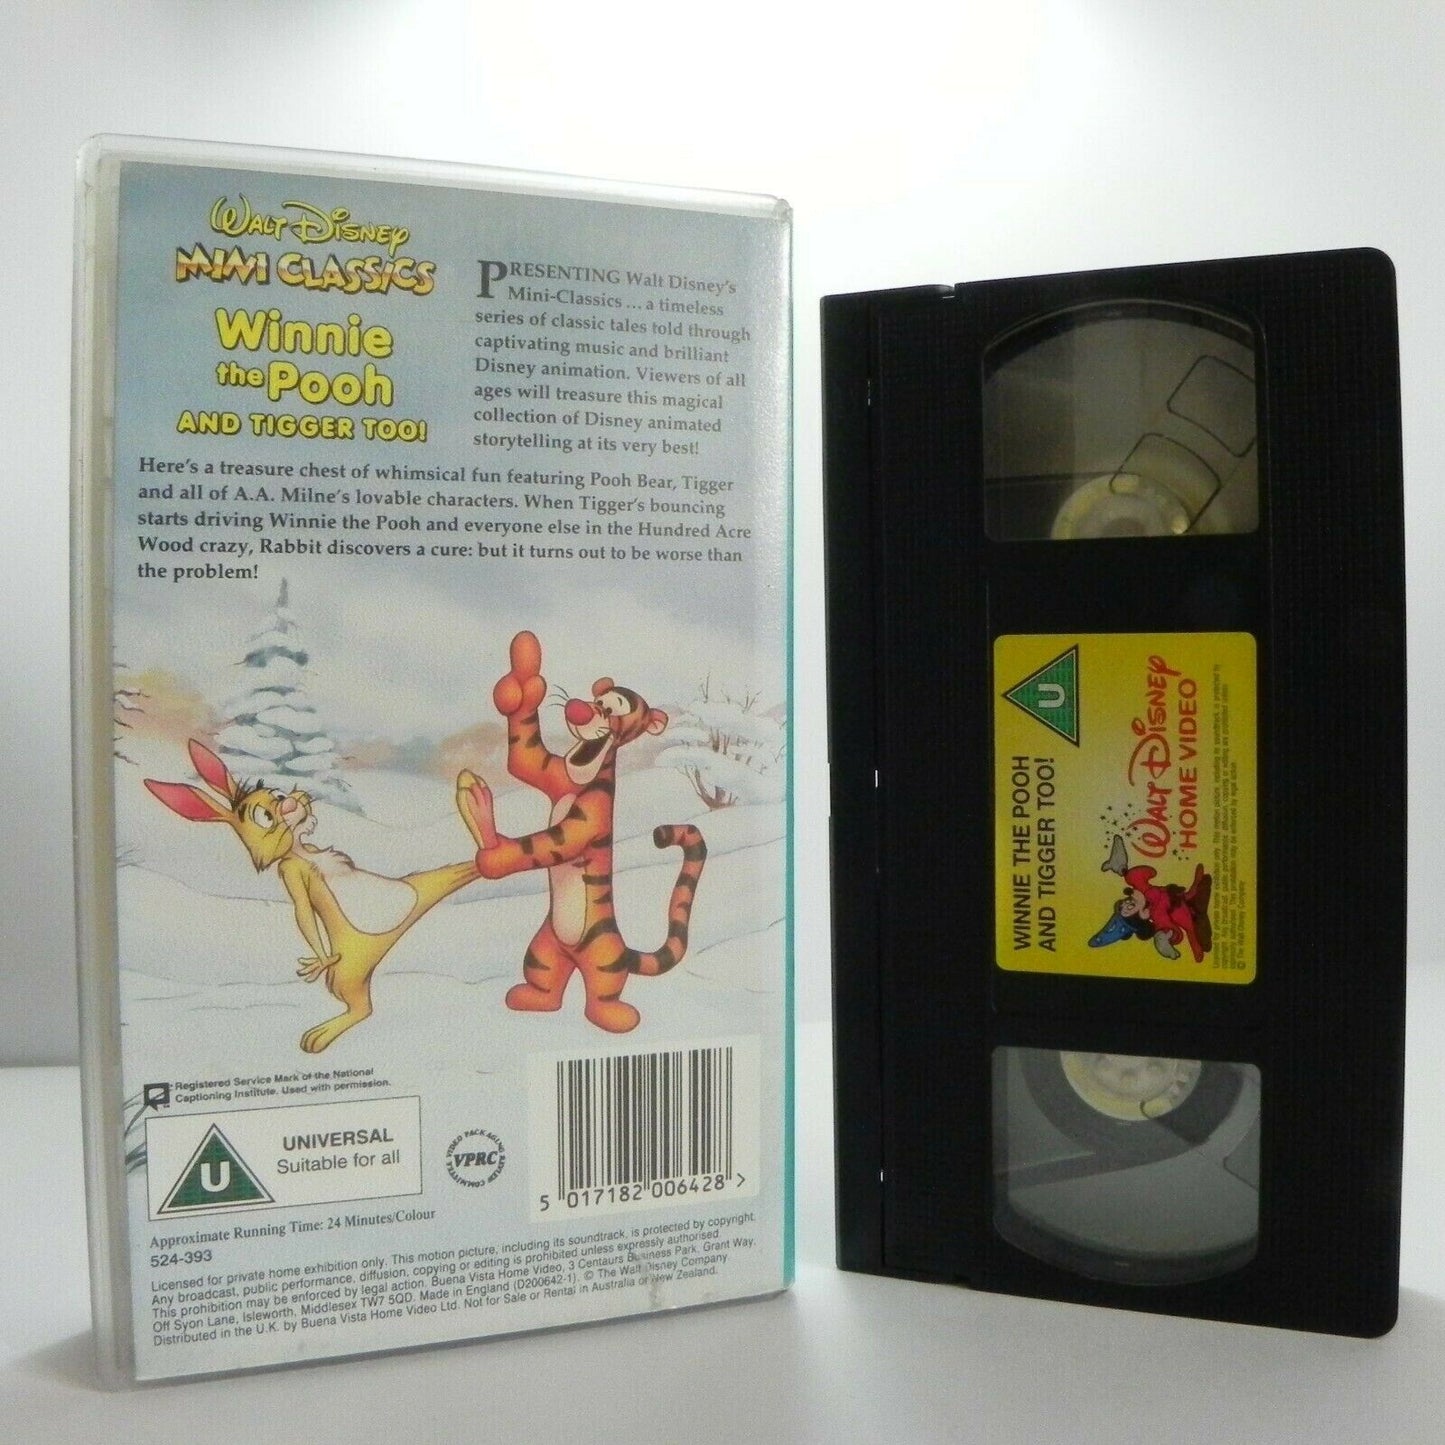 Winnie The Pooh And The Tigger Too! - Walt Disney - Classic Animation - Pal VHS-